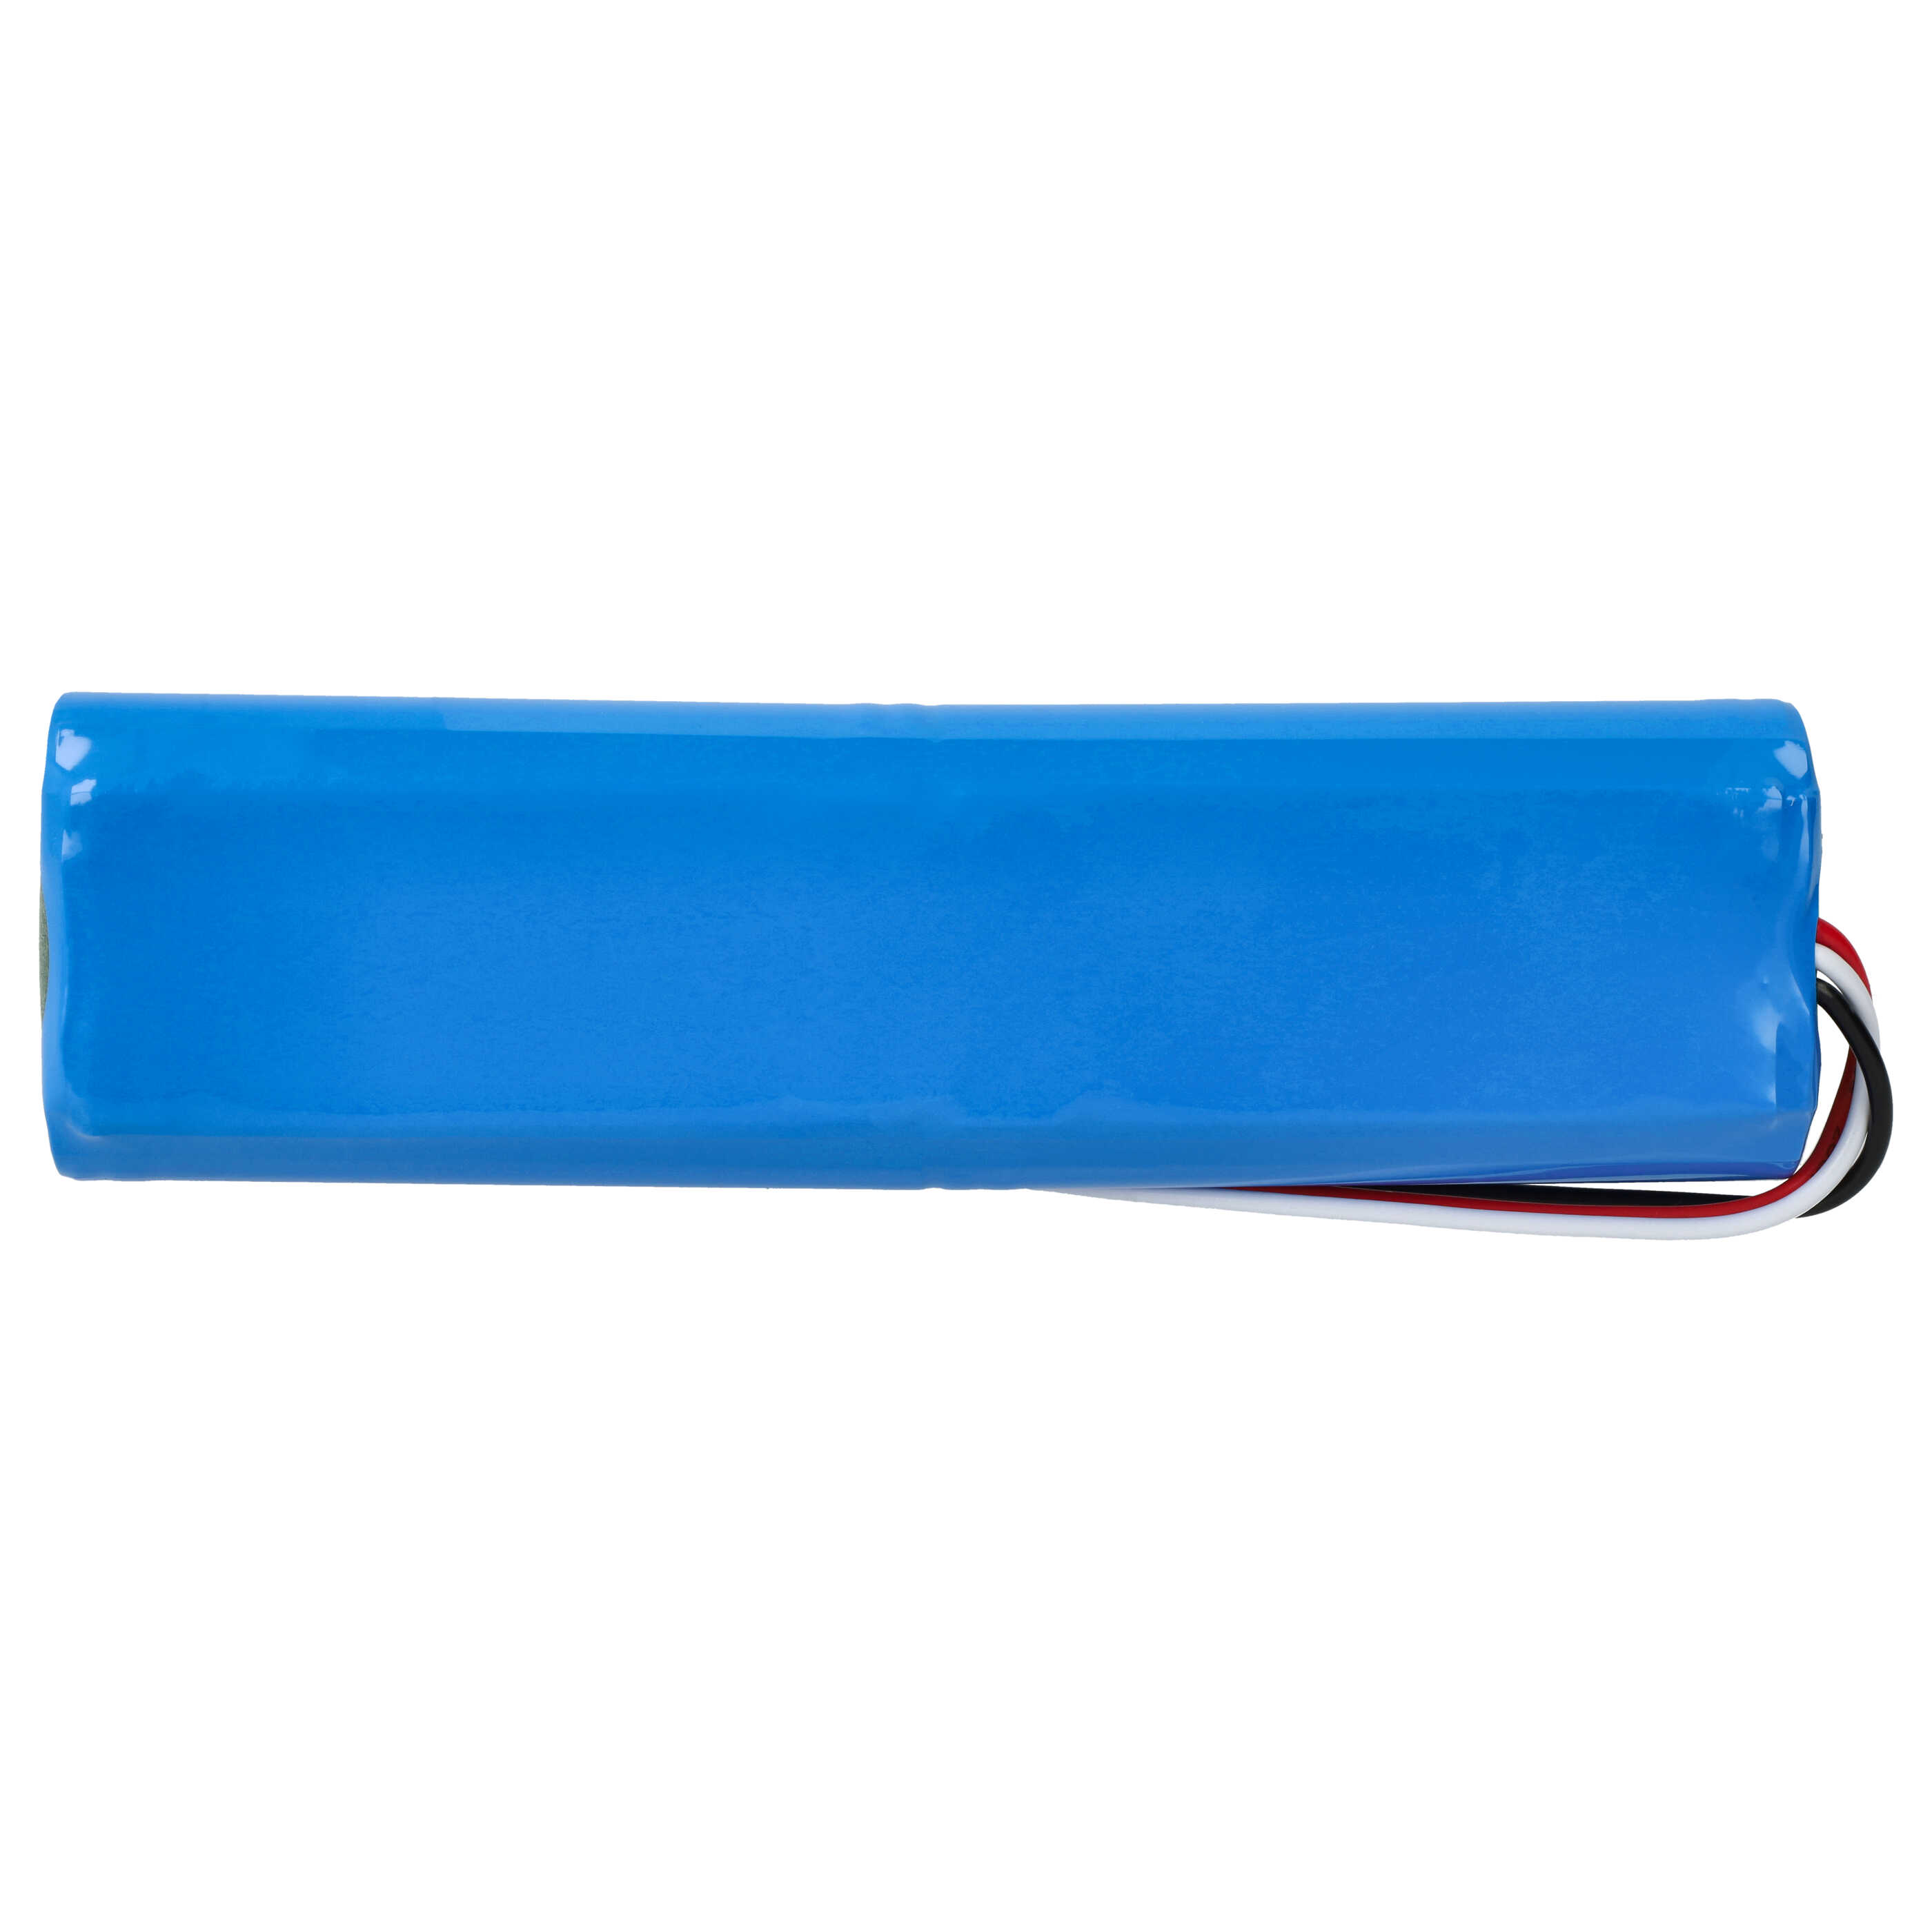 Battery Replacement for Haier MH1-4S1P-SC for - 2600mAh, 14.4V, Li-Ion